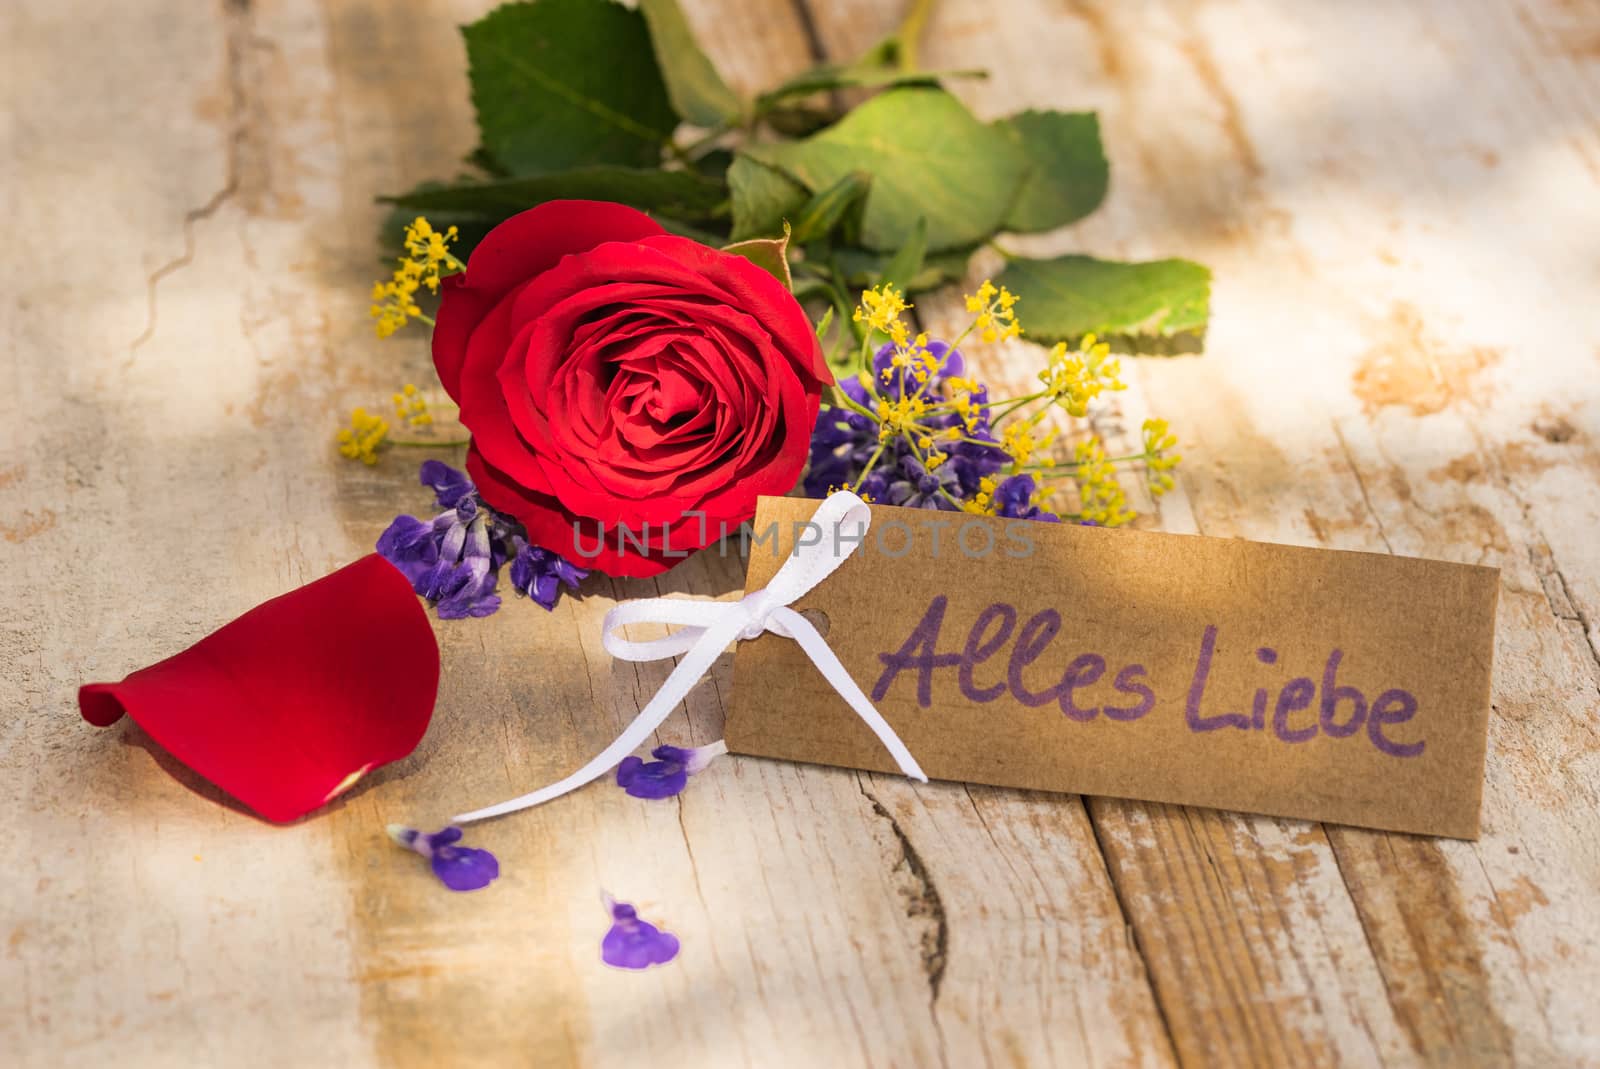 Bunch of flowers for Valentine day and tag with german text, Alles Liebe, means love